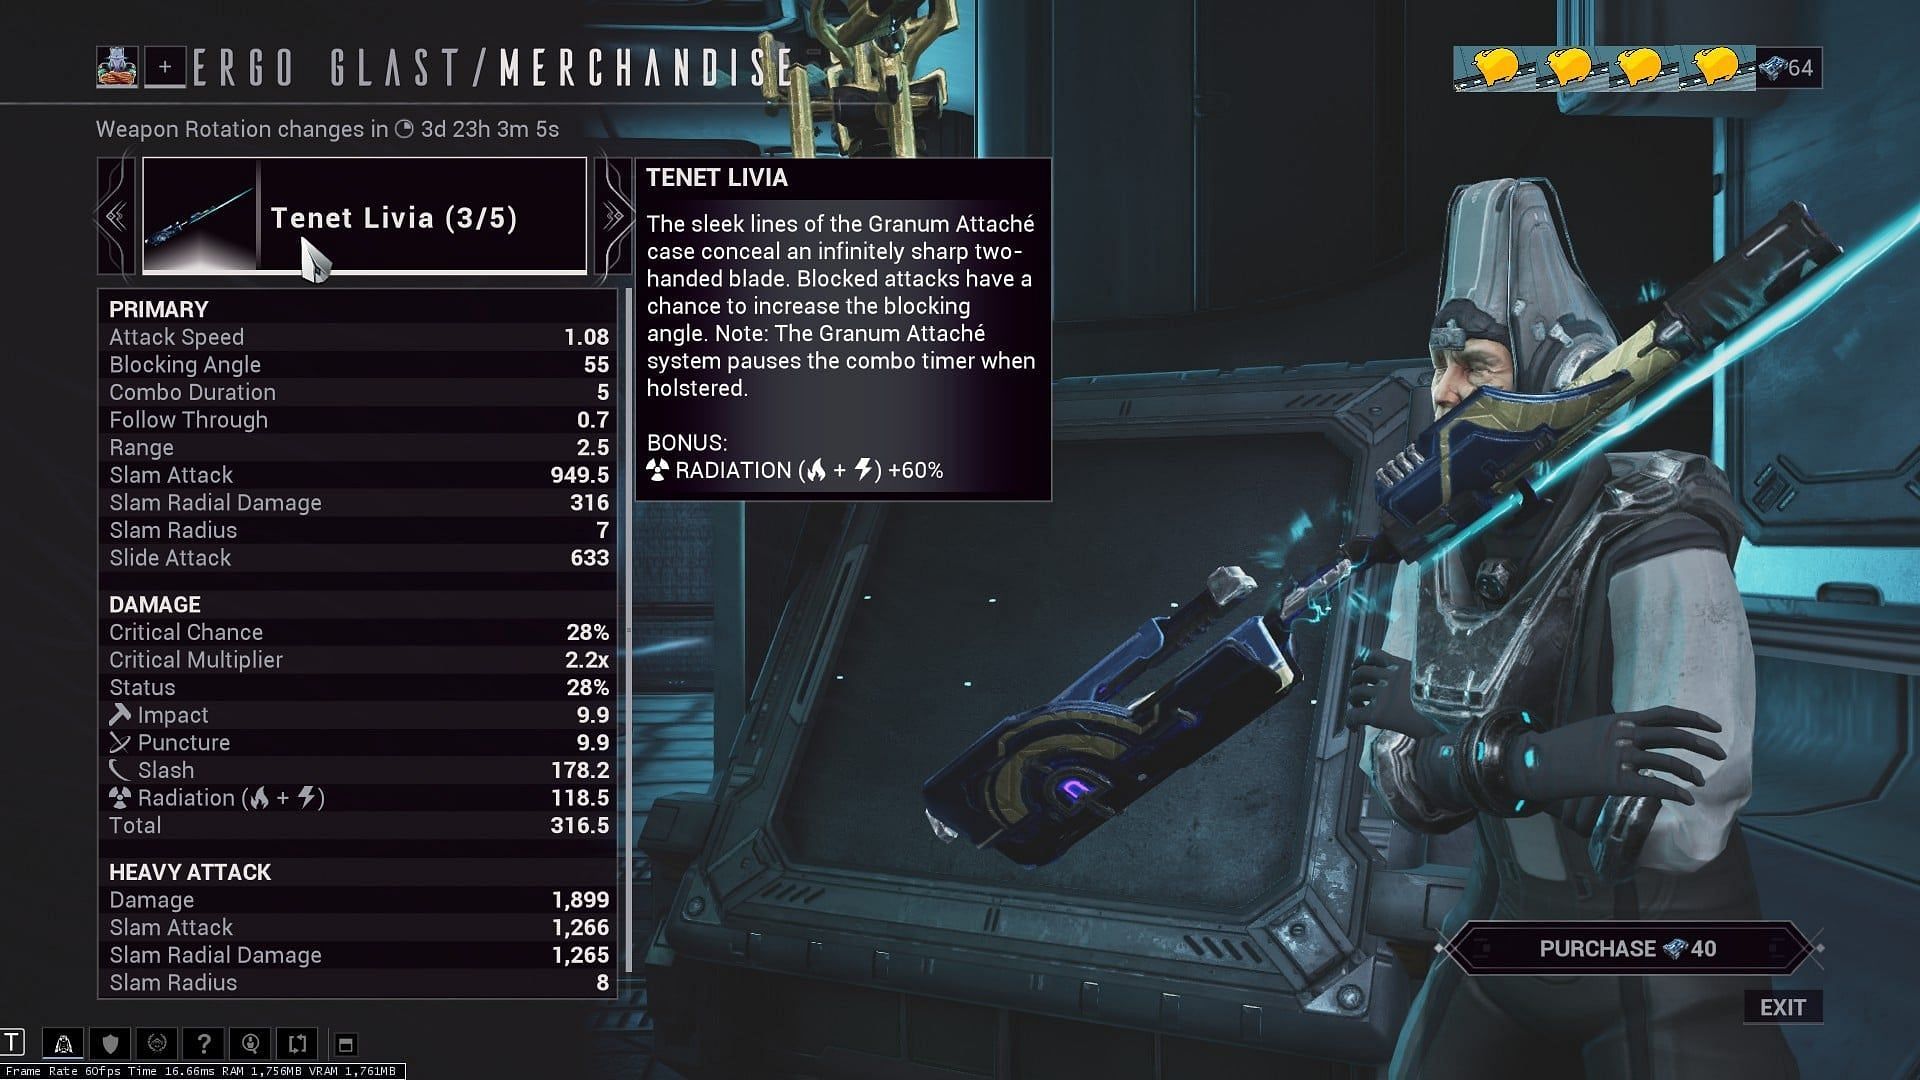 Tenet Livia suffers from a bad case of Stances (Image via Digital Extremes)